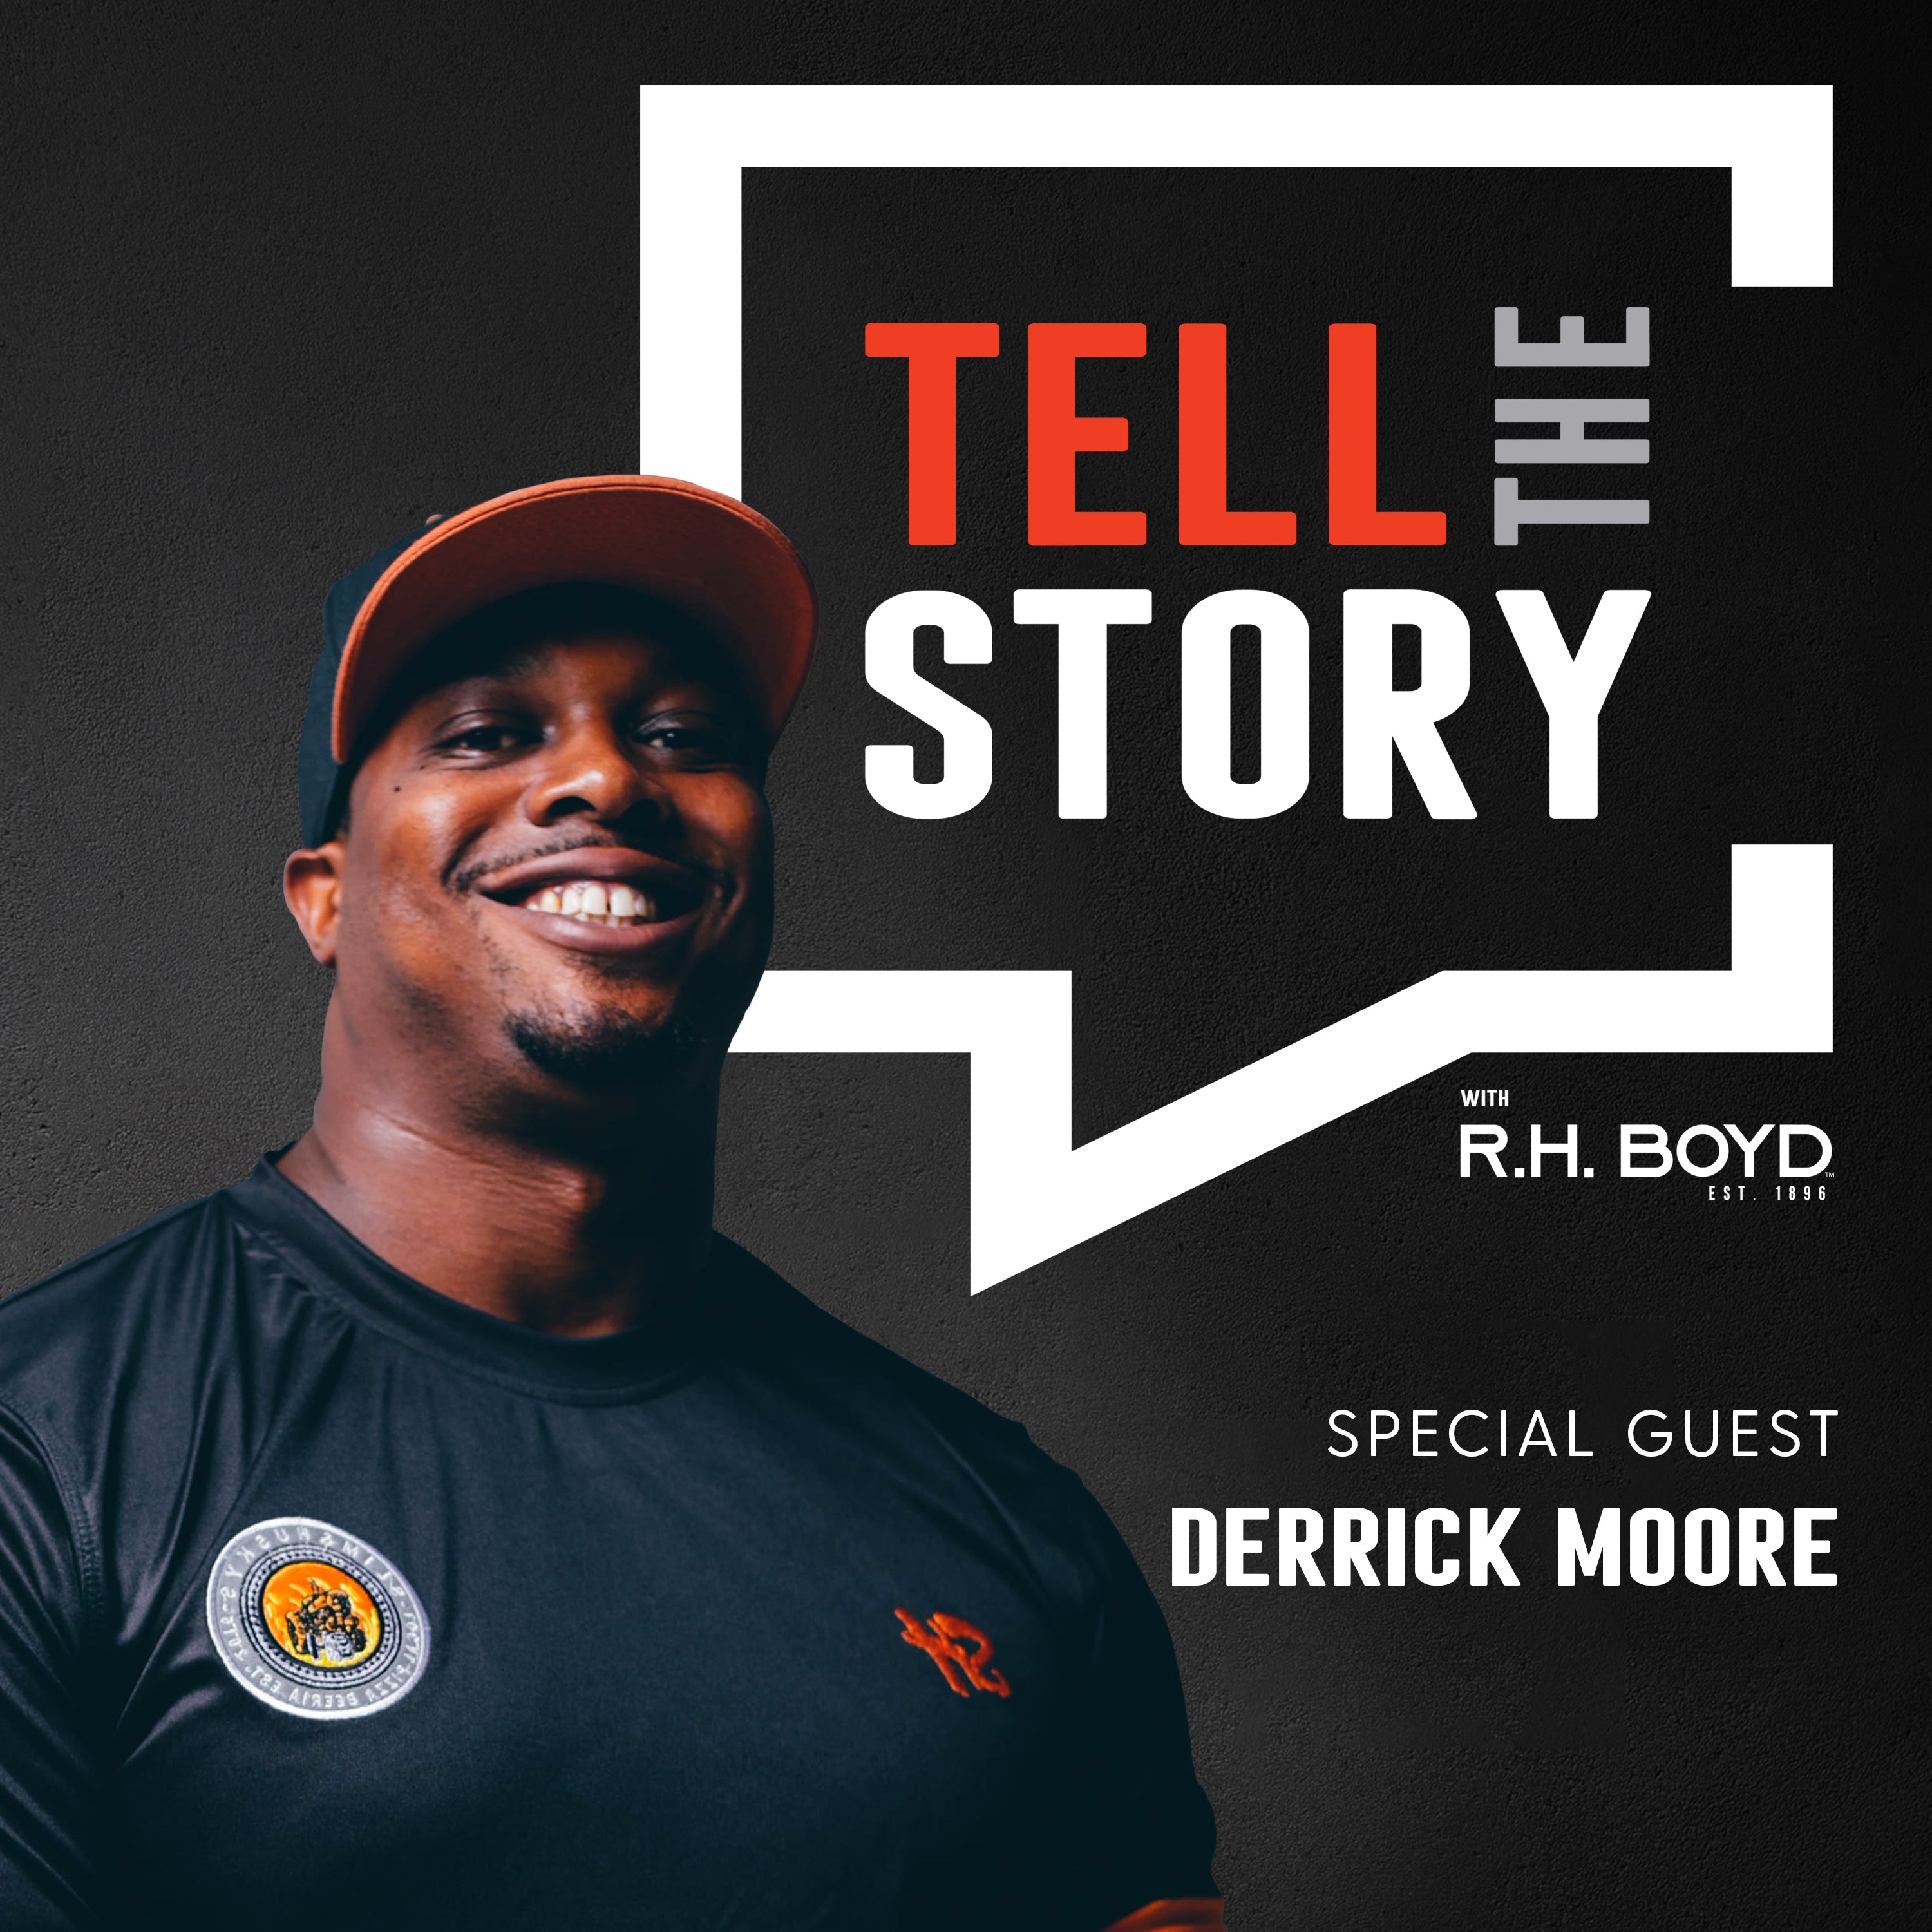 Empowering Communities through the Restaurant Business with Derrick Moore